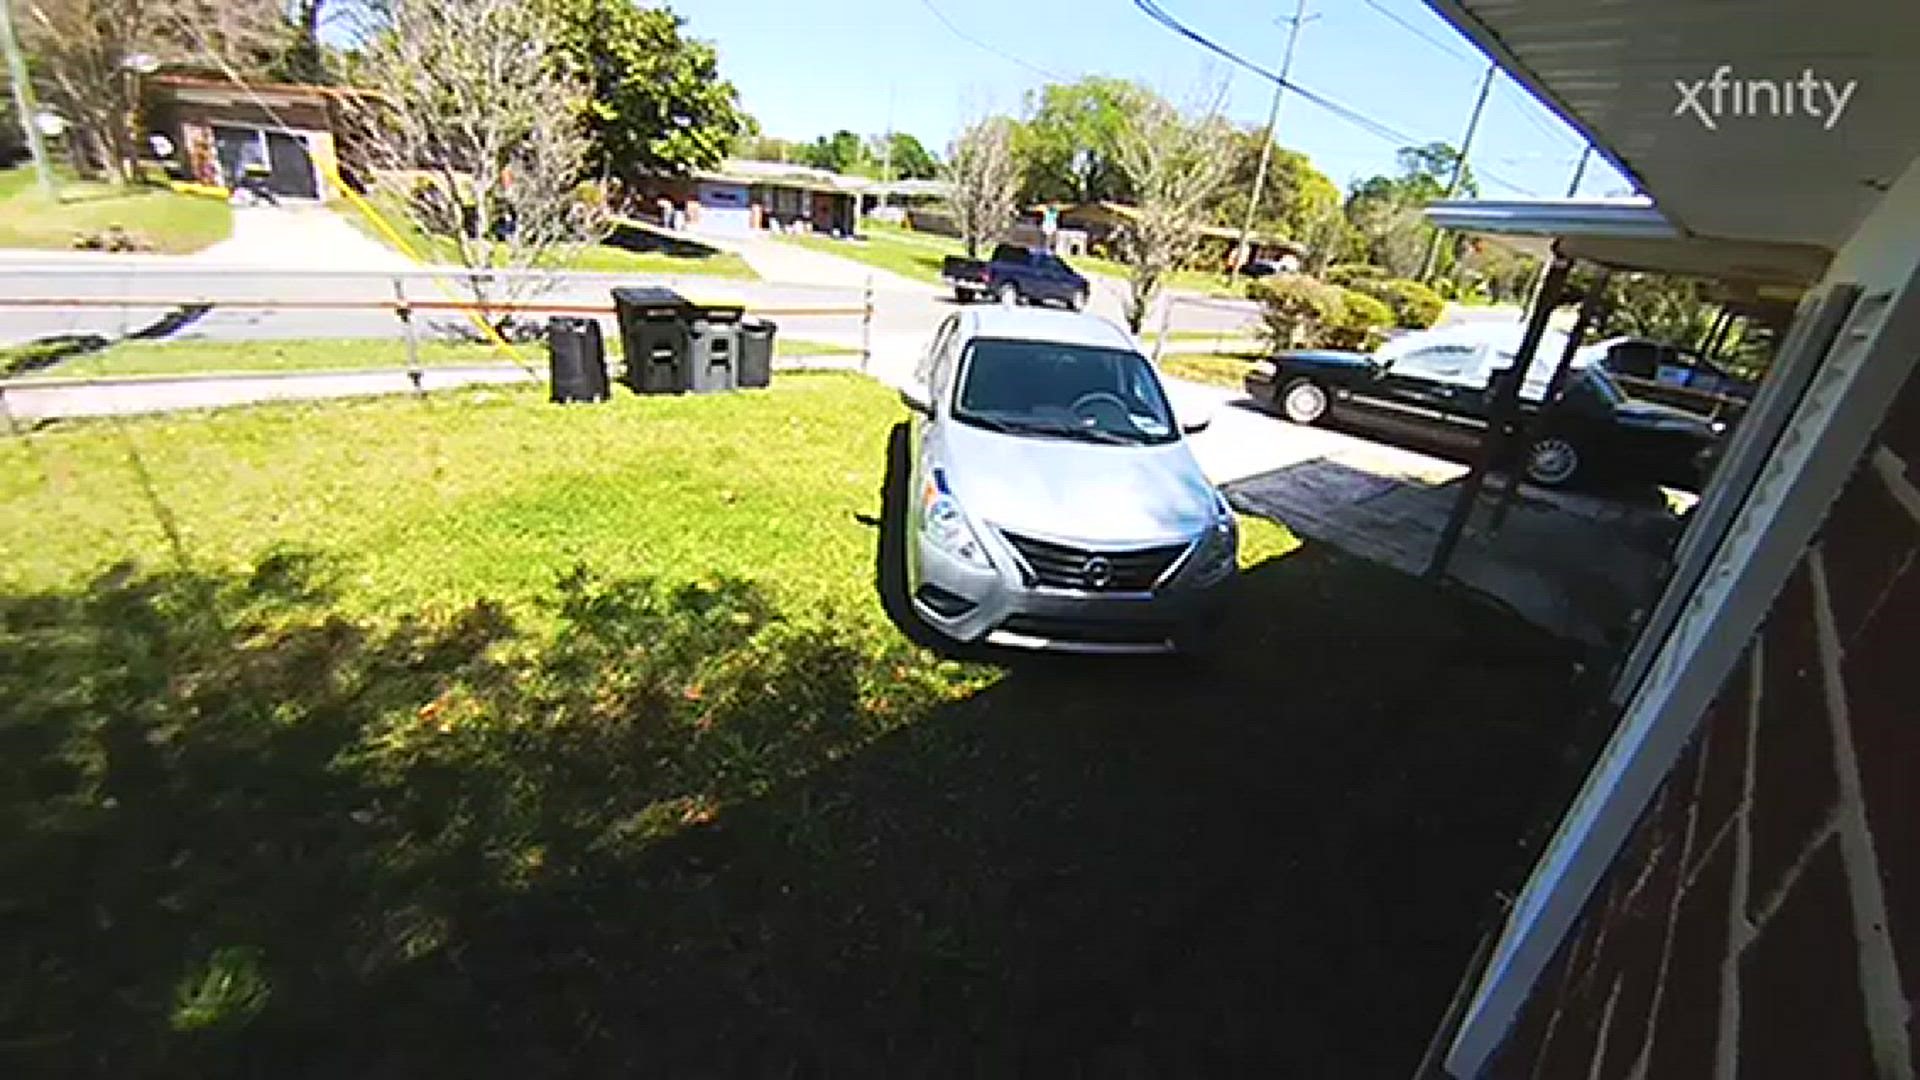 *Warning: This video contains strong language. Multiple people were injured on Saturday afternoon after a car plowed into a home in the Grand Park area.